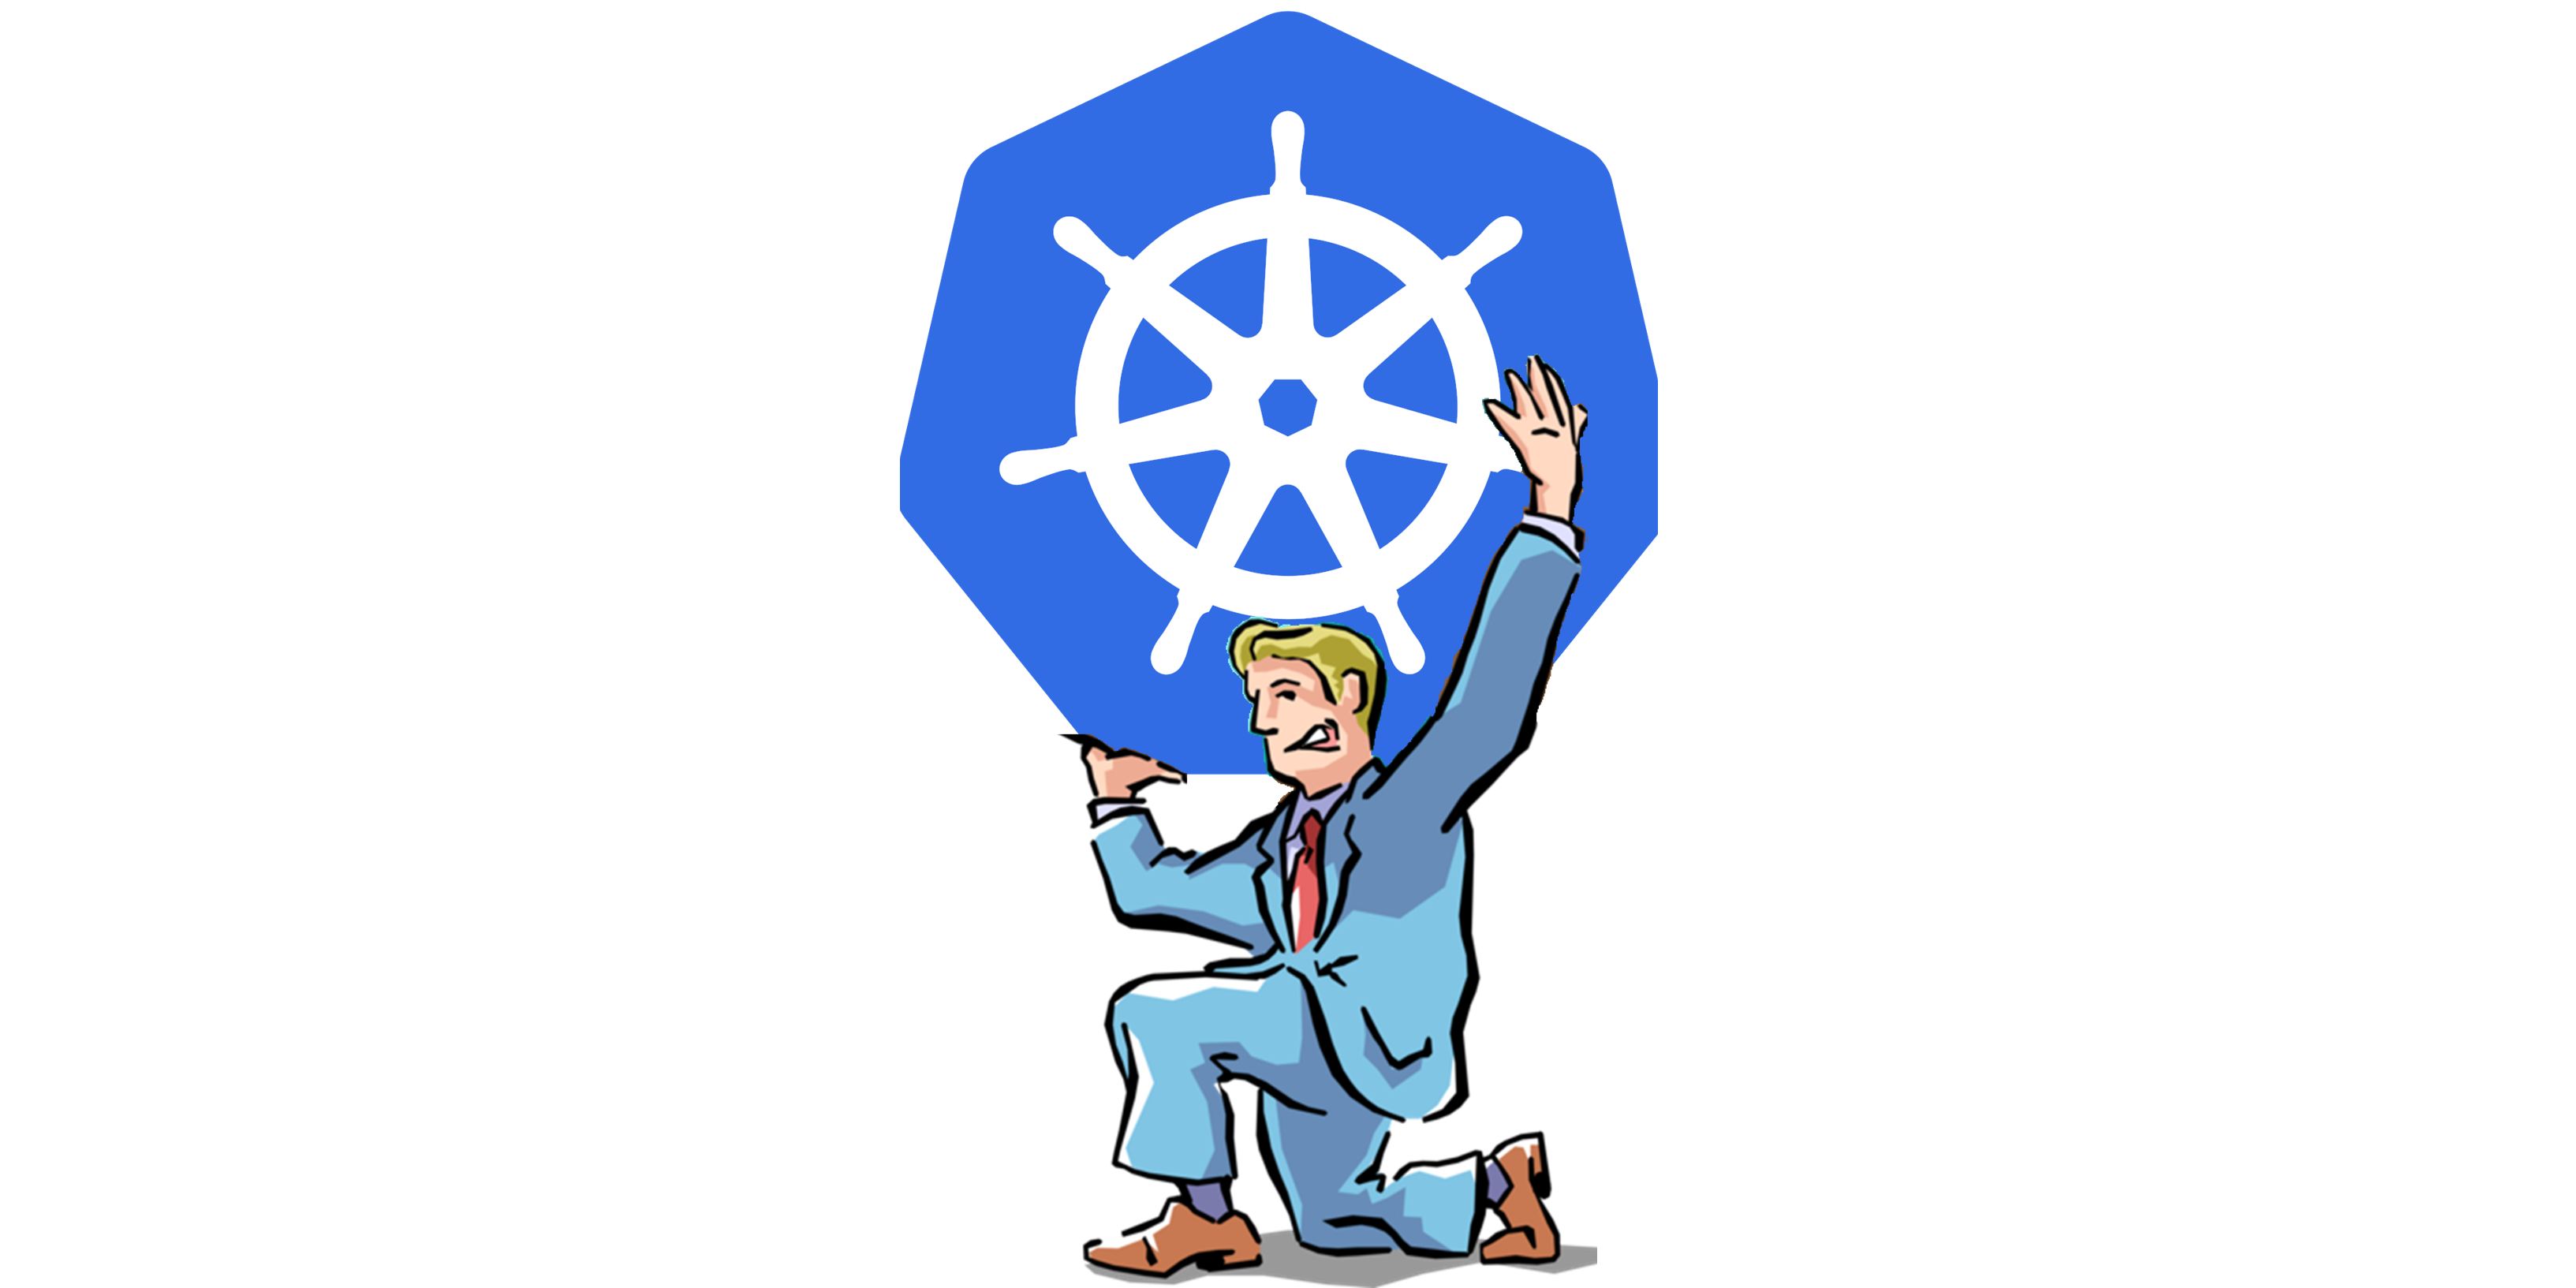 Portainer, a Kubernetes Management Platform for newbies and experts alike.